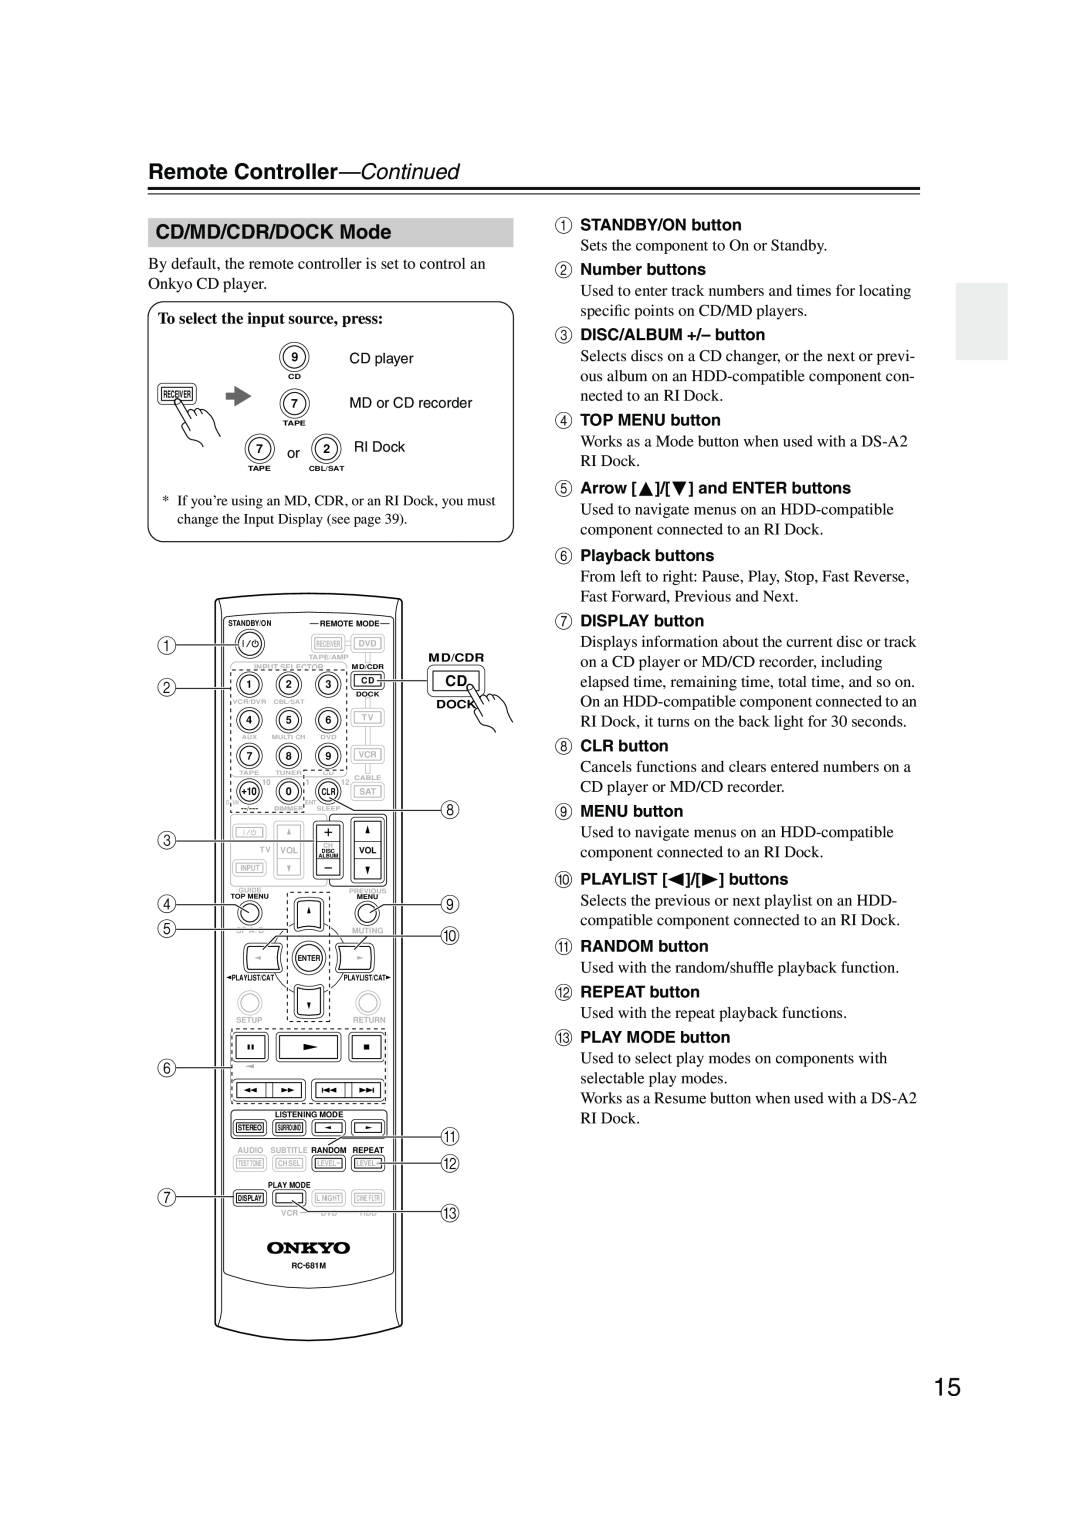 Onkyo TX-SR505E, TX-SR8550, SR575 CD/MD/CDR/DOCK Mode, Remote Controller-Continued, To select the input source, press 